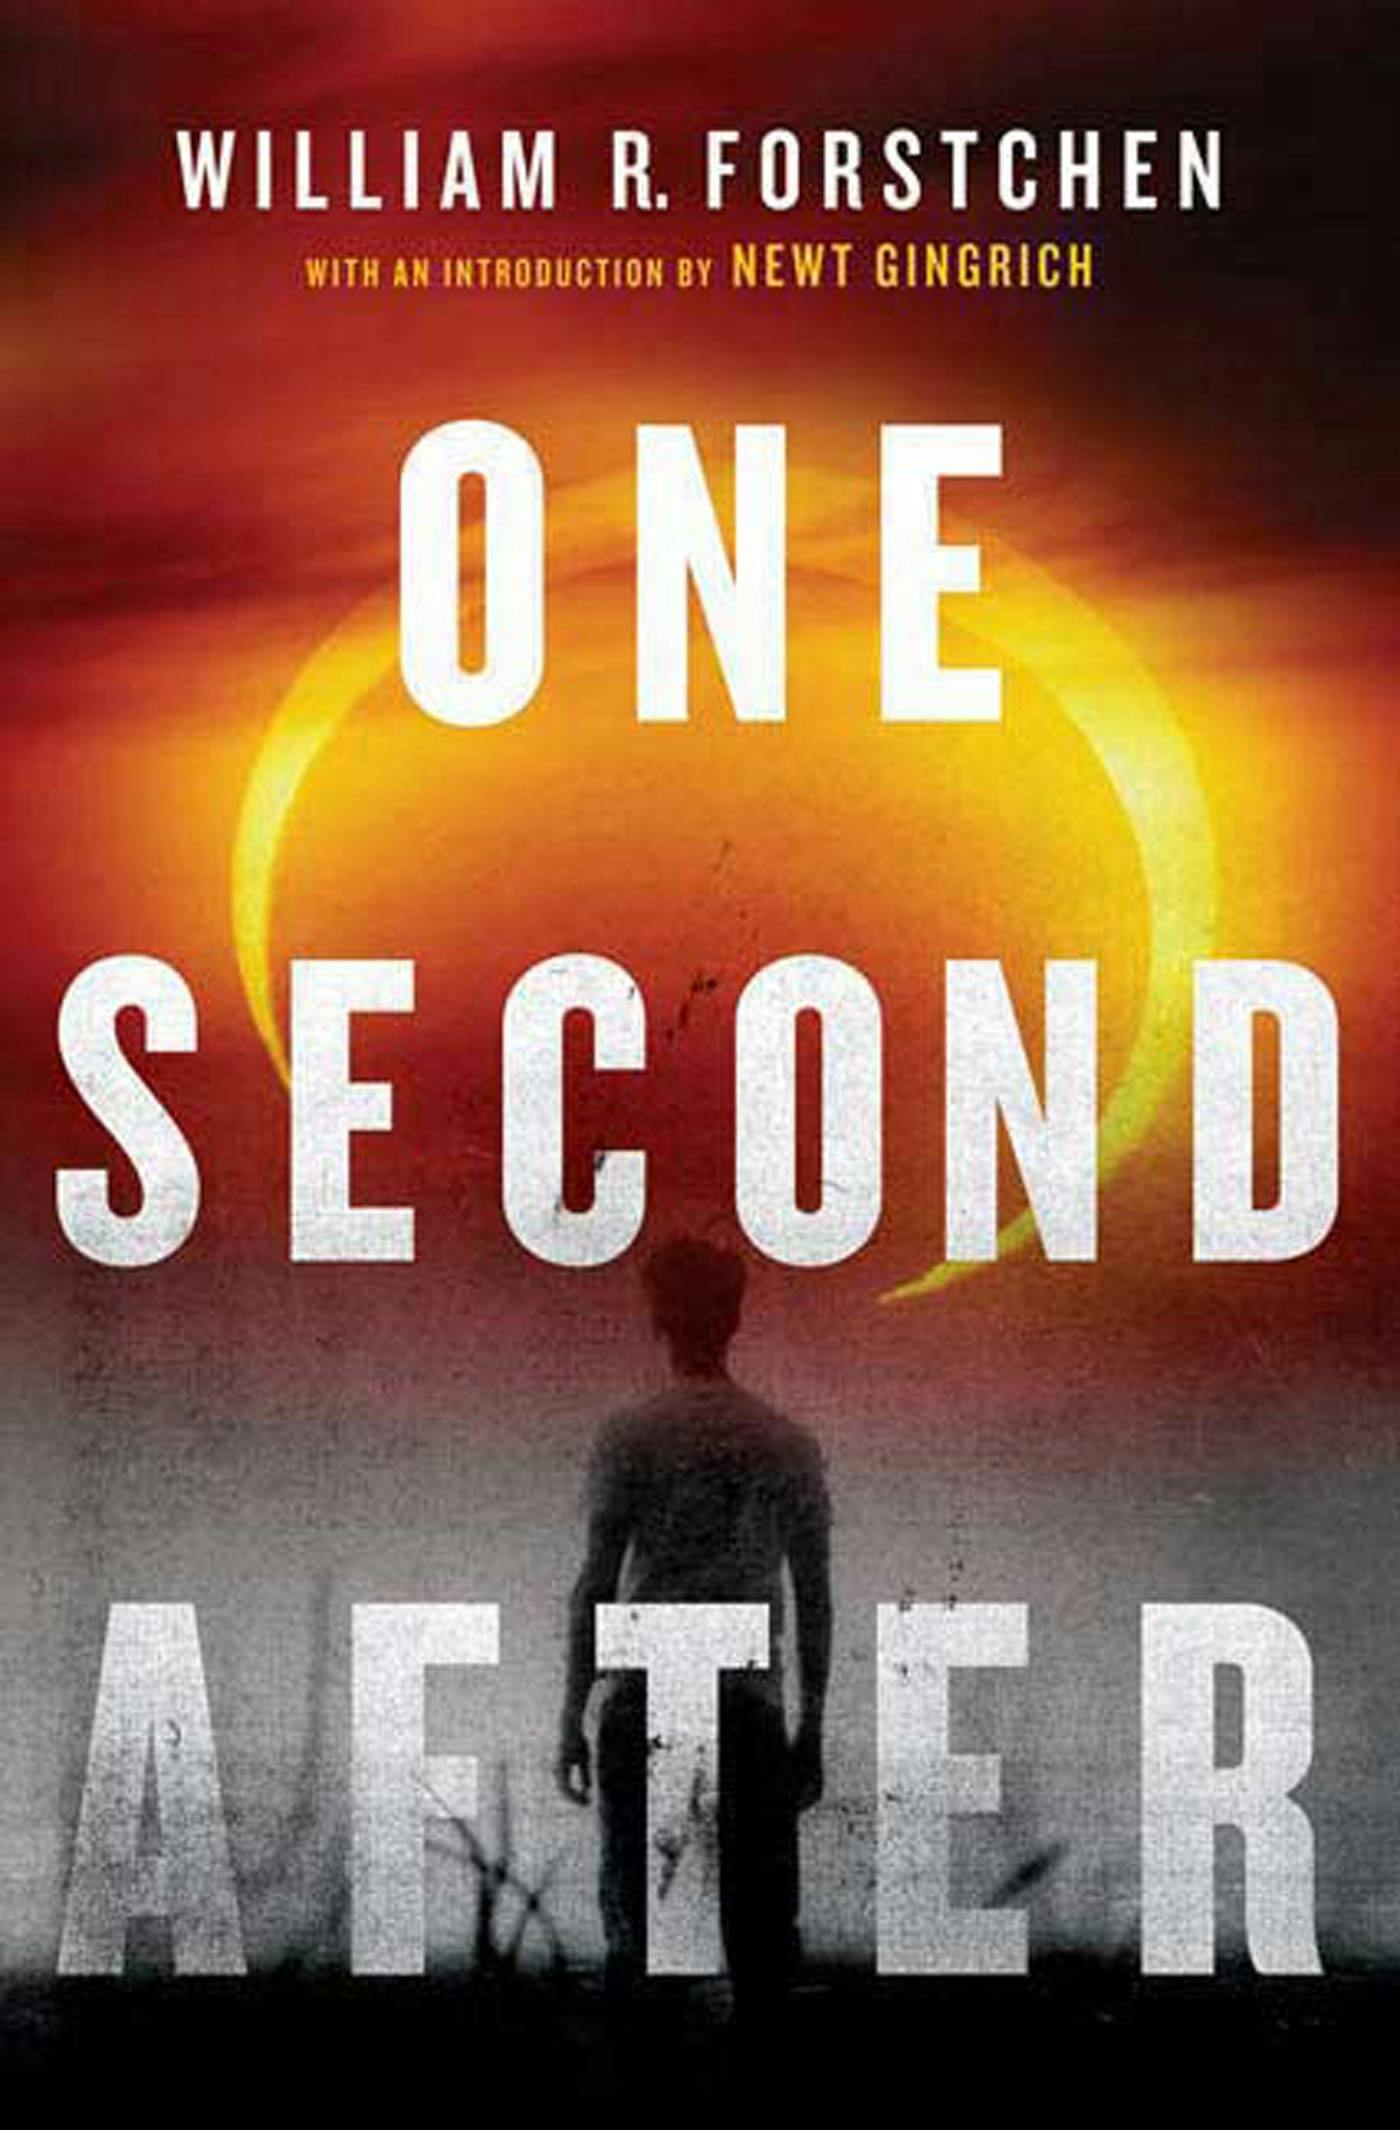 Cover for the book titled as: One Second After